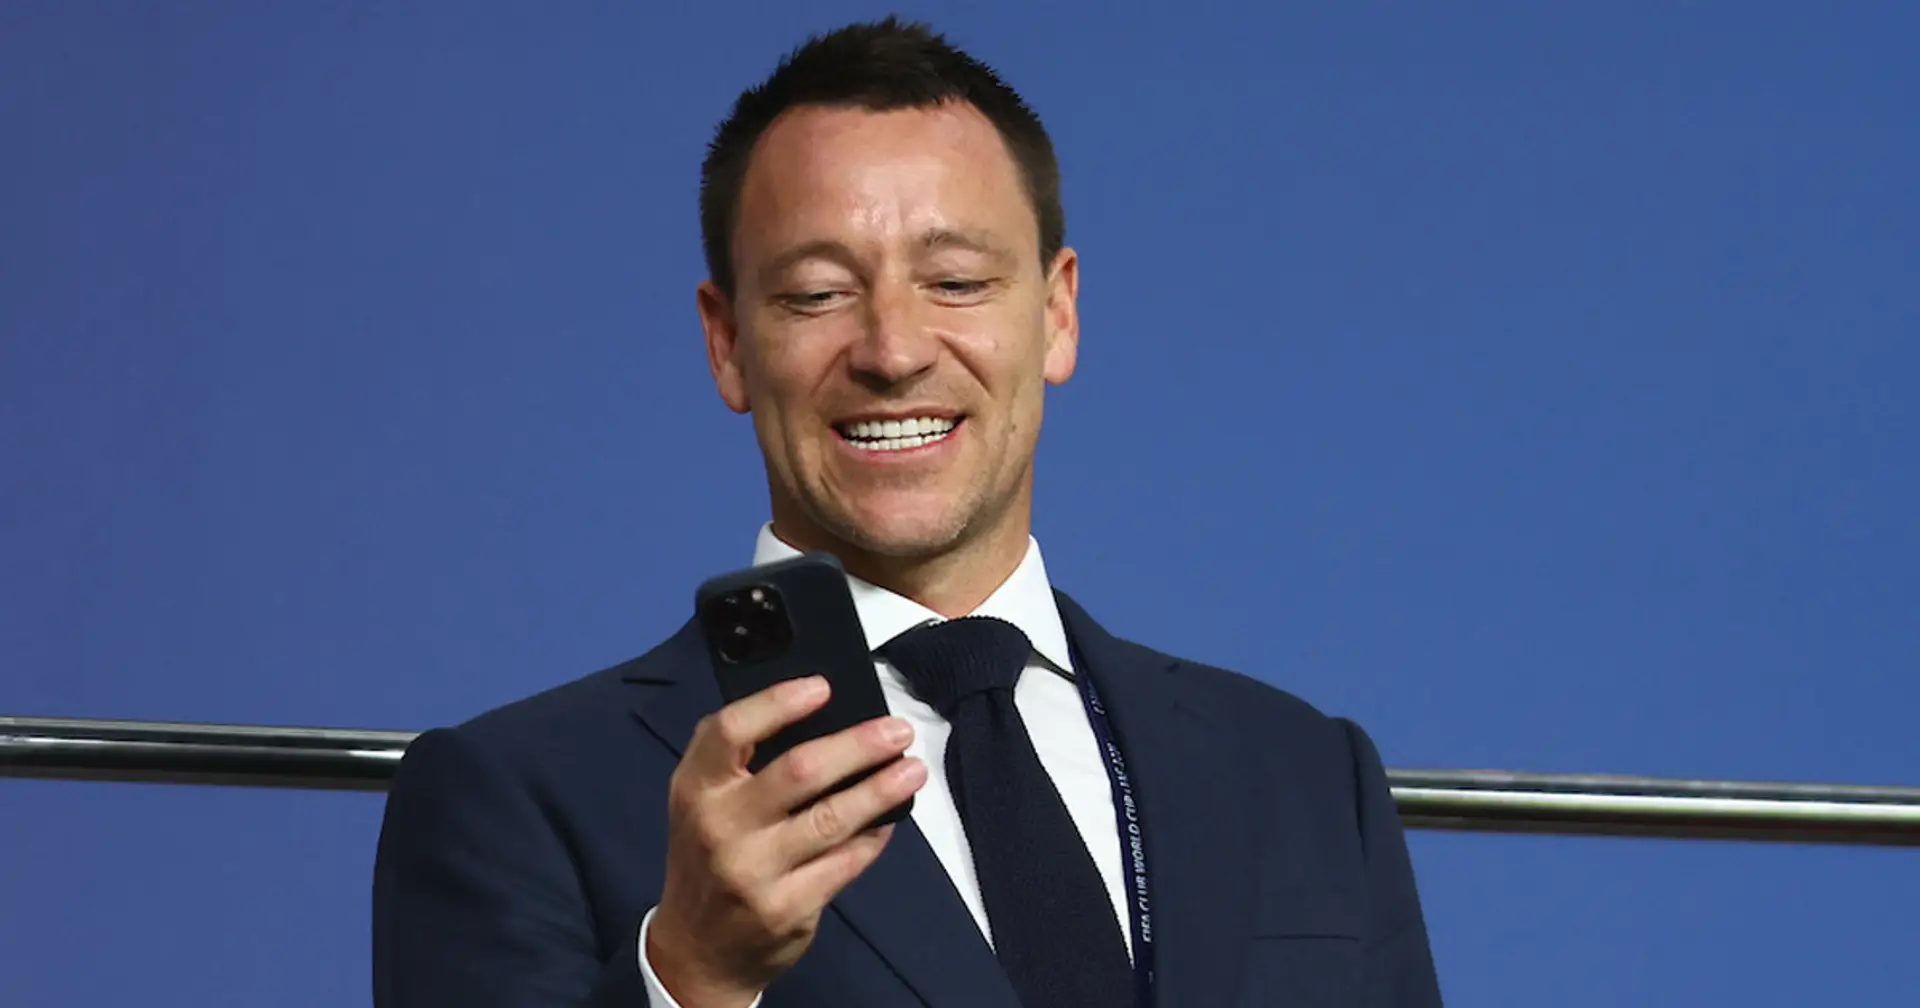 John Terry to become Leicester assistant manager (reliability: 5 stars)